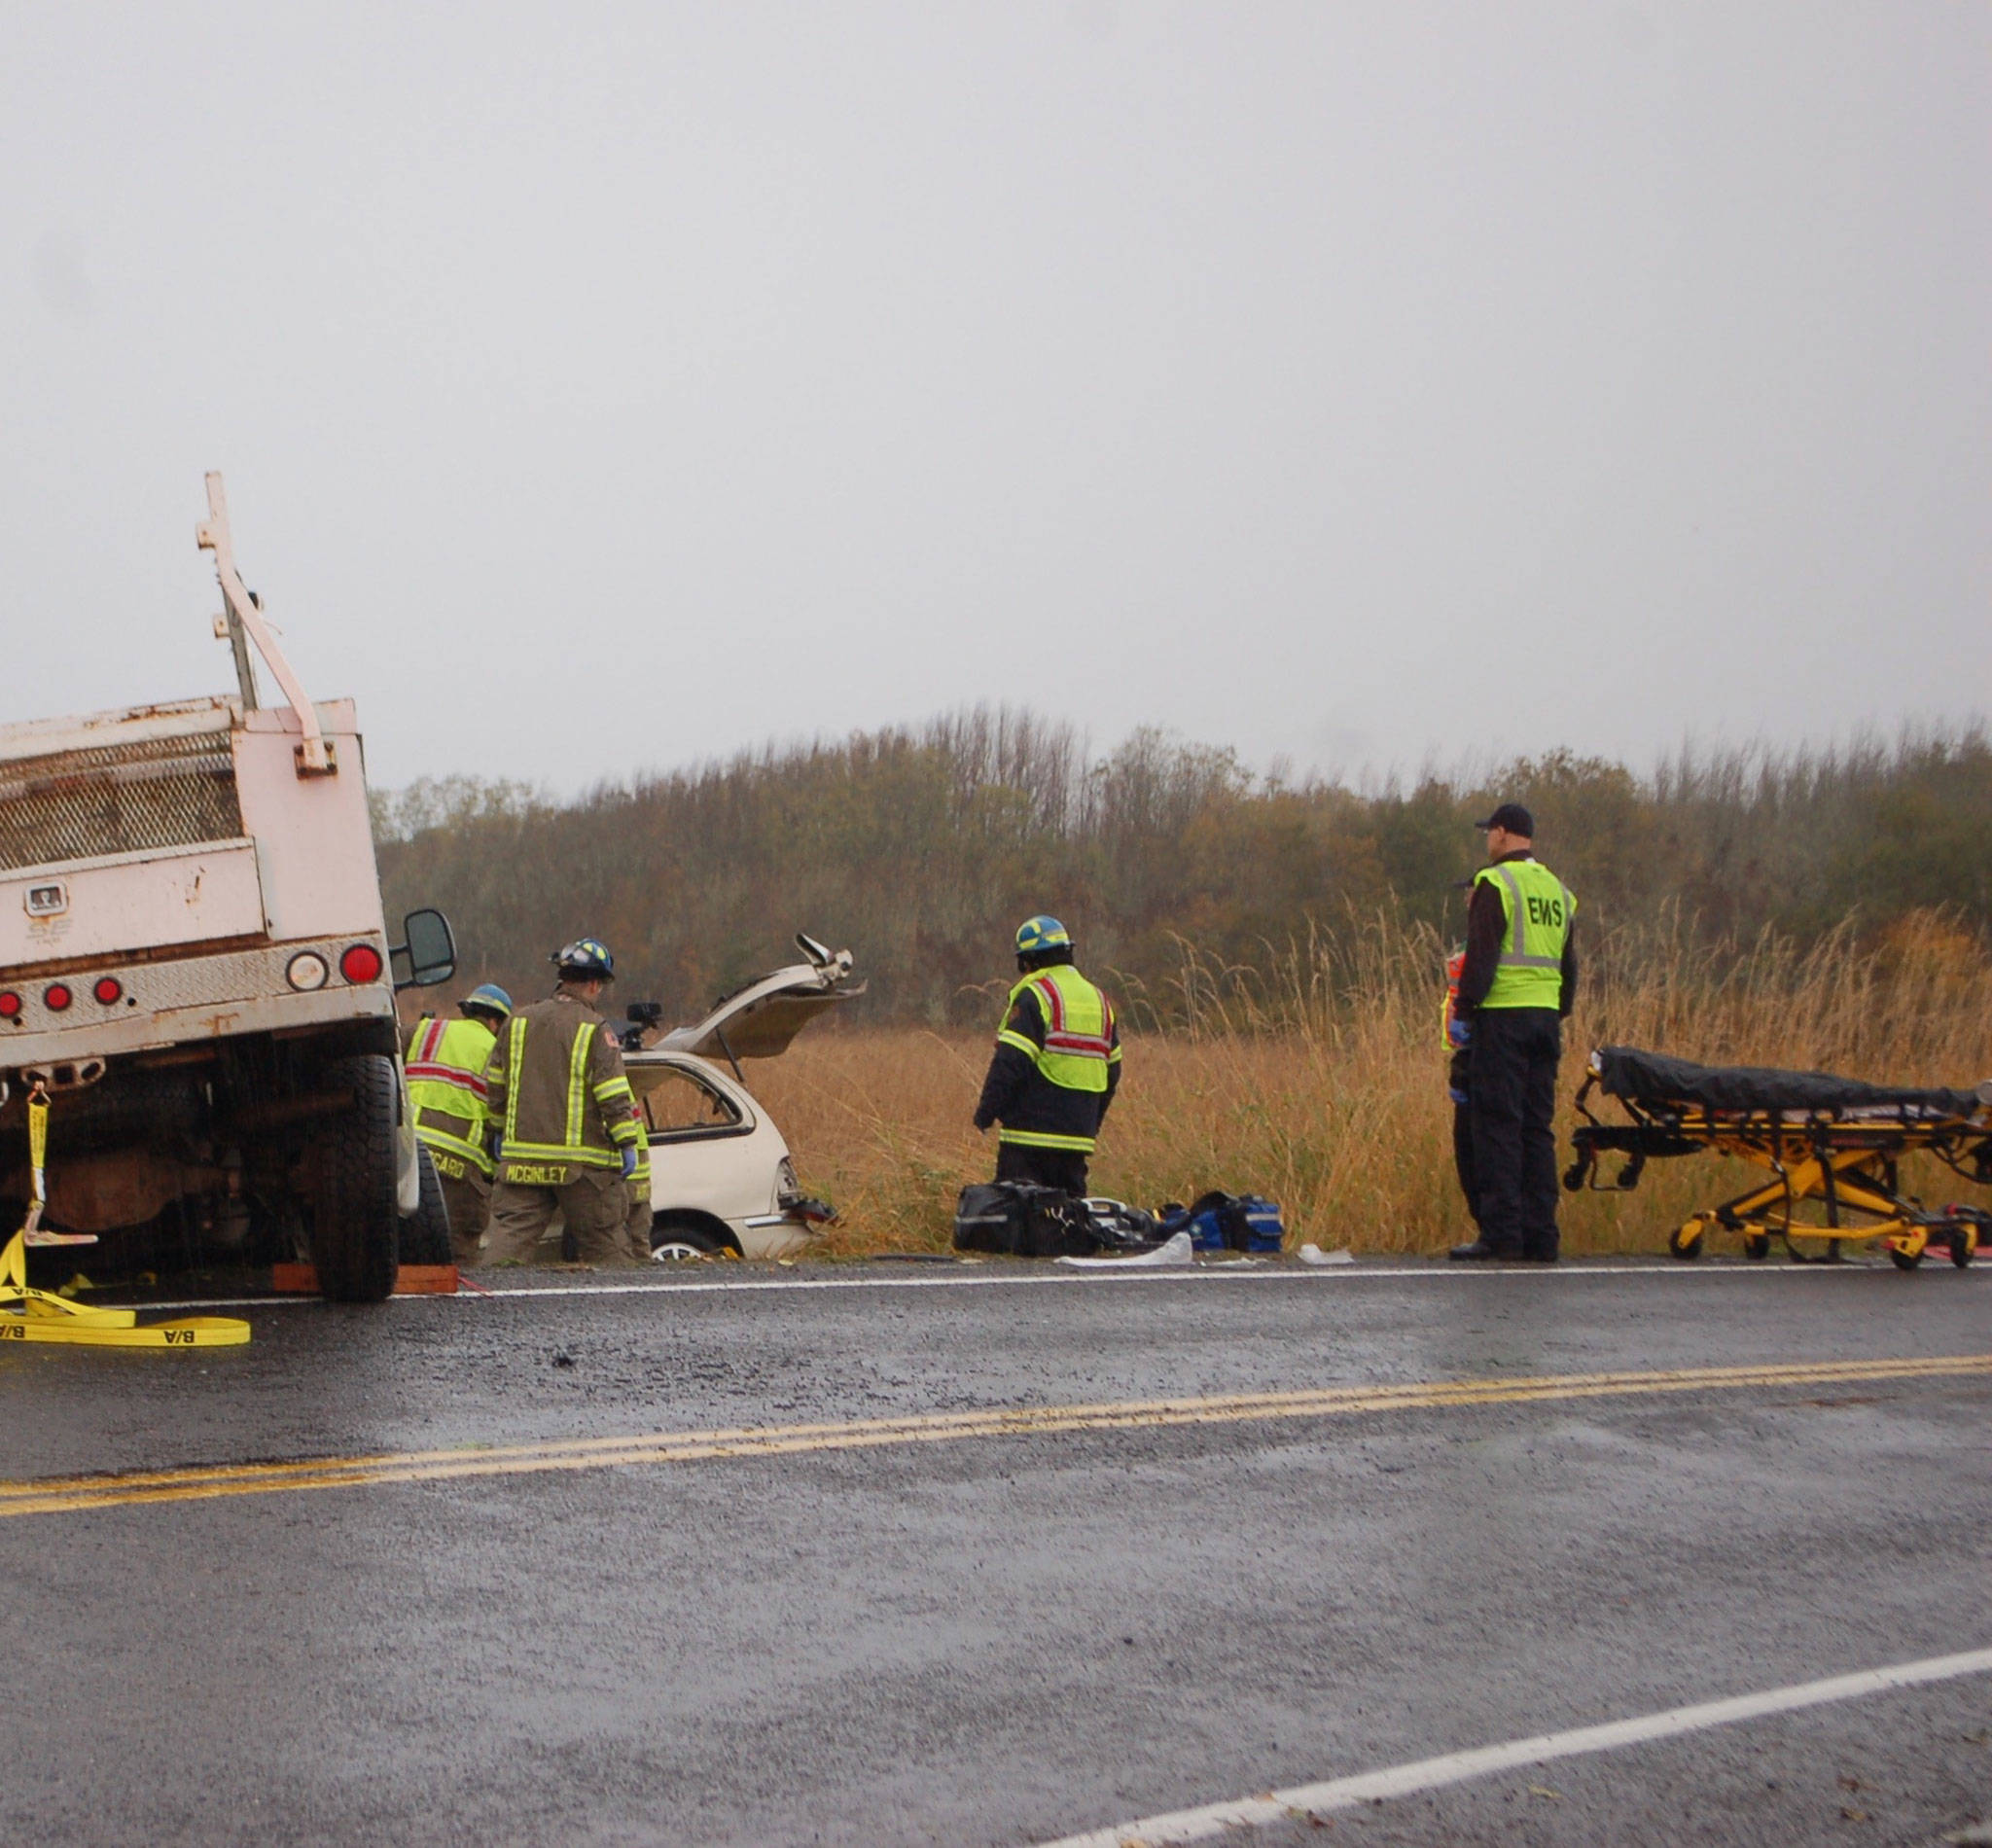 Clallam County Fire District 3 and Clallam County Sheriff respond to a fatal car collision at 3:48 p.m. on Oct. 18, near the Dungeness Valley Wildlife Refuge. Sequim Gazette photo by Erin Hawkins